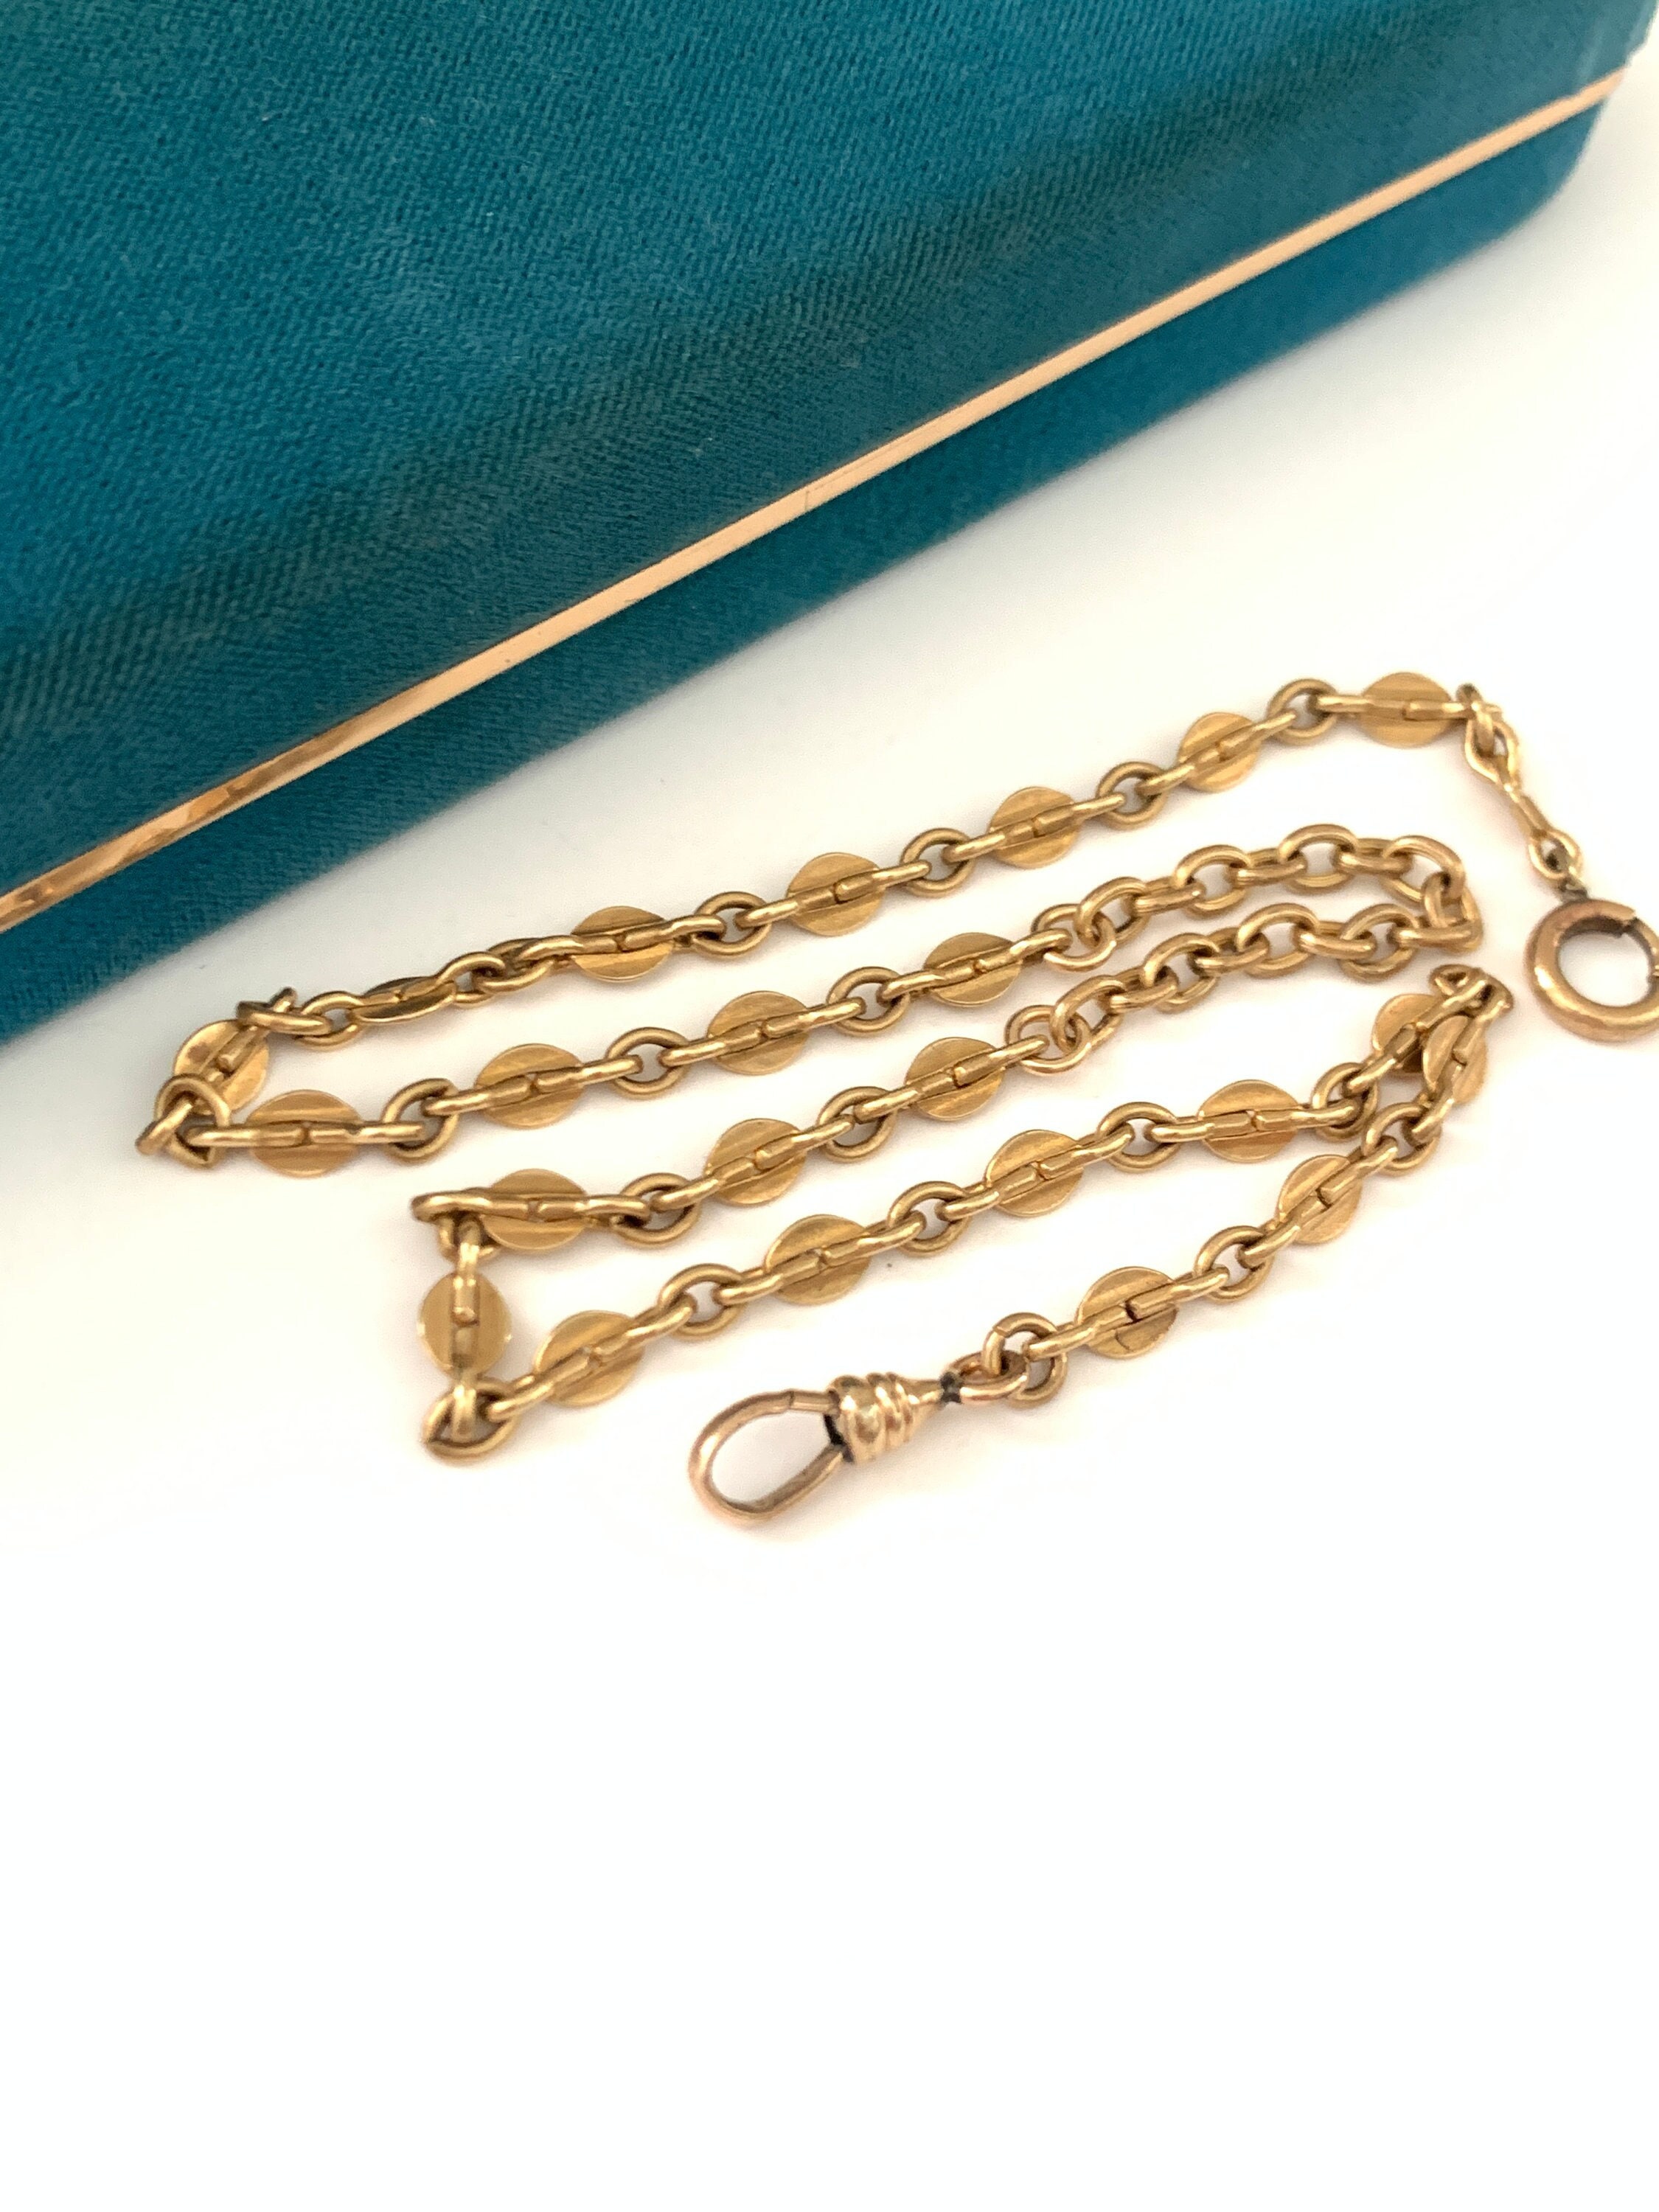 Quality Brass Chain Necklace, Nickel & Lead Free, Soldered Links, Custom Length, Raw Solid Brass Plain Chain Necklace